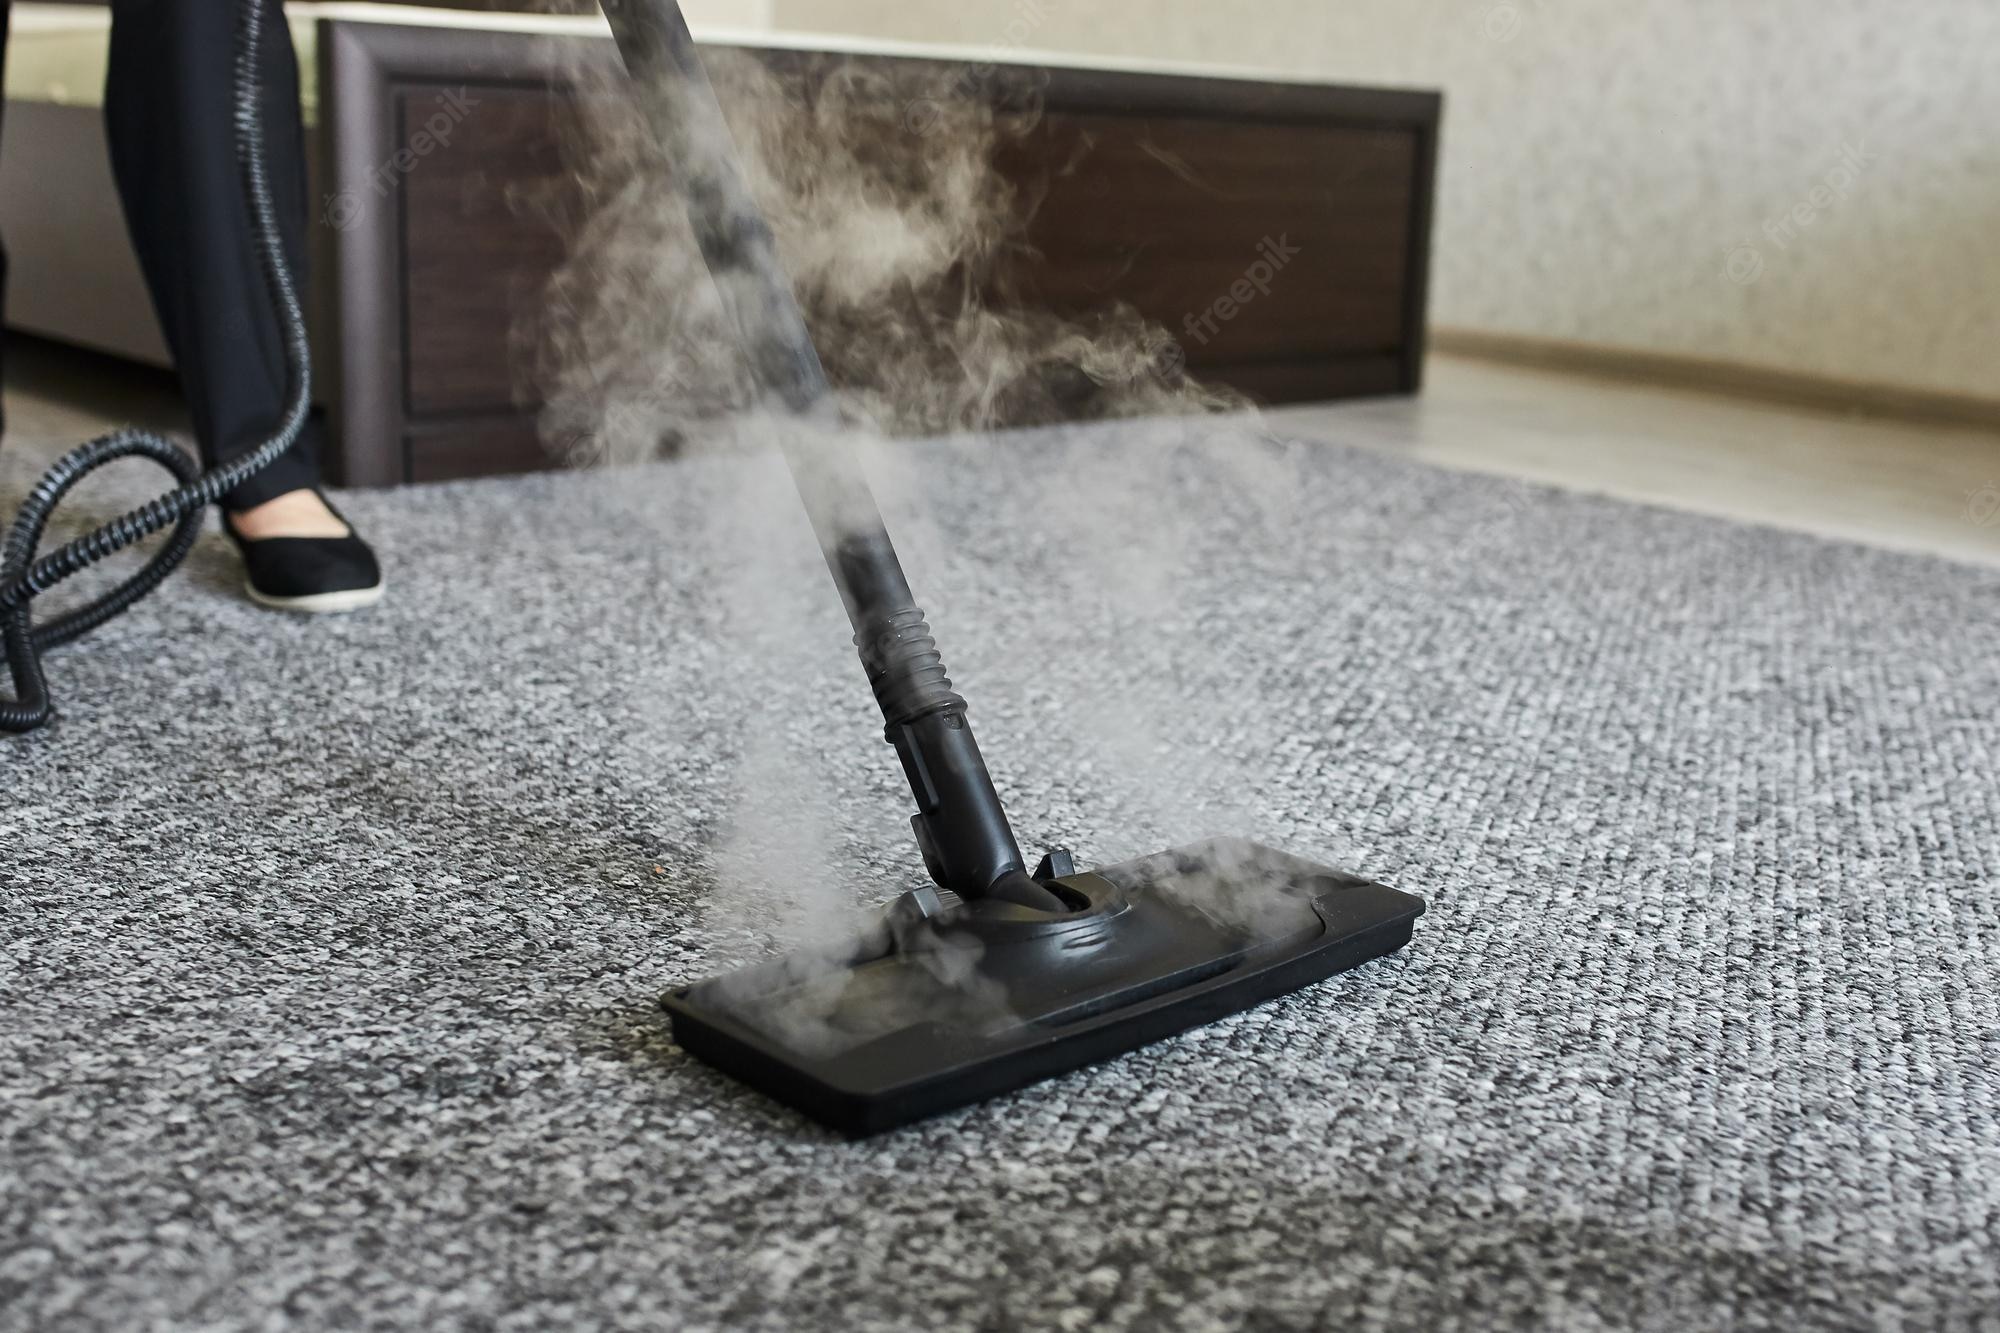 Why is vacuuming not a replacement for professional carpet cleaning?